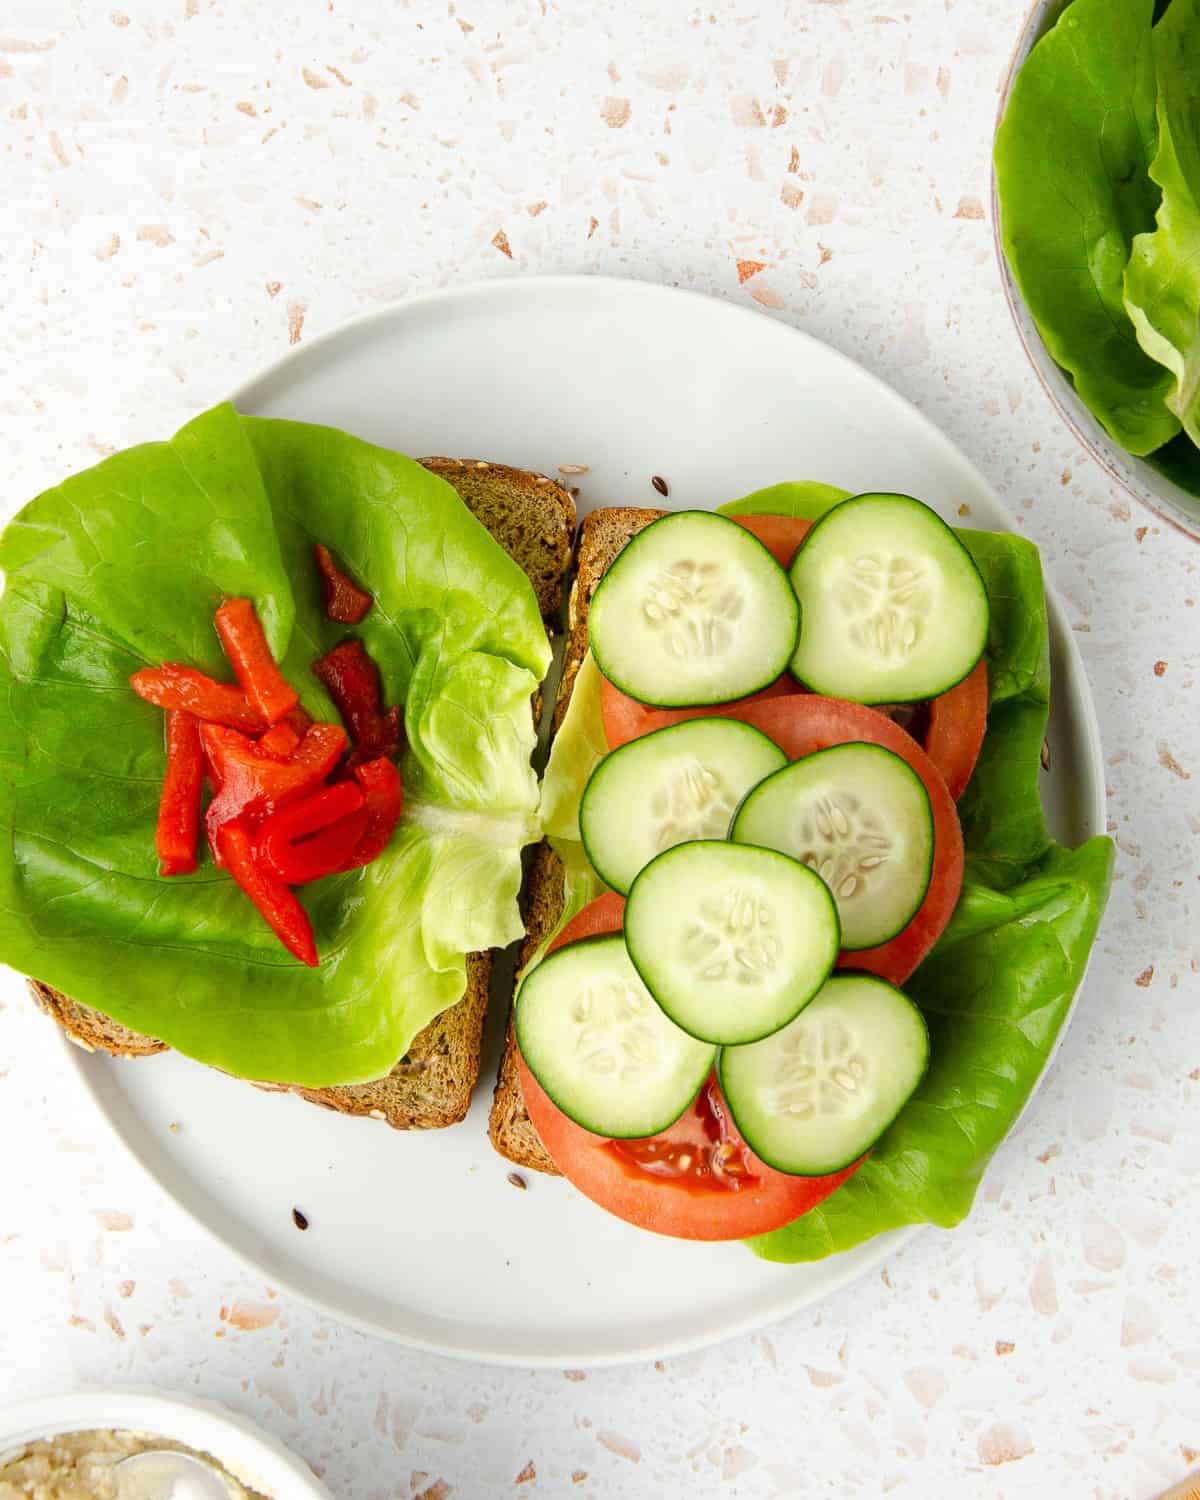 two slices of grain bread topped with butter lettuce and pimiento peppers on the left bread slice, and butter lettuce, tomato slices and cucumber slices on the right side. a bowl of butter lettuce and a bowl of mashed feta and hummus peeking on the sides.